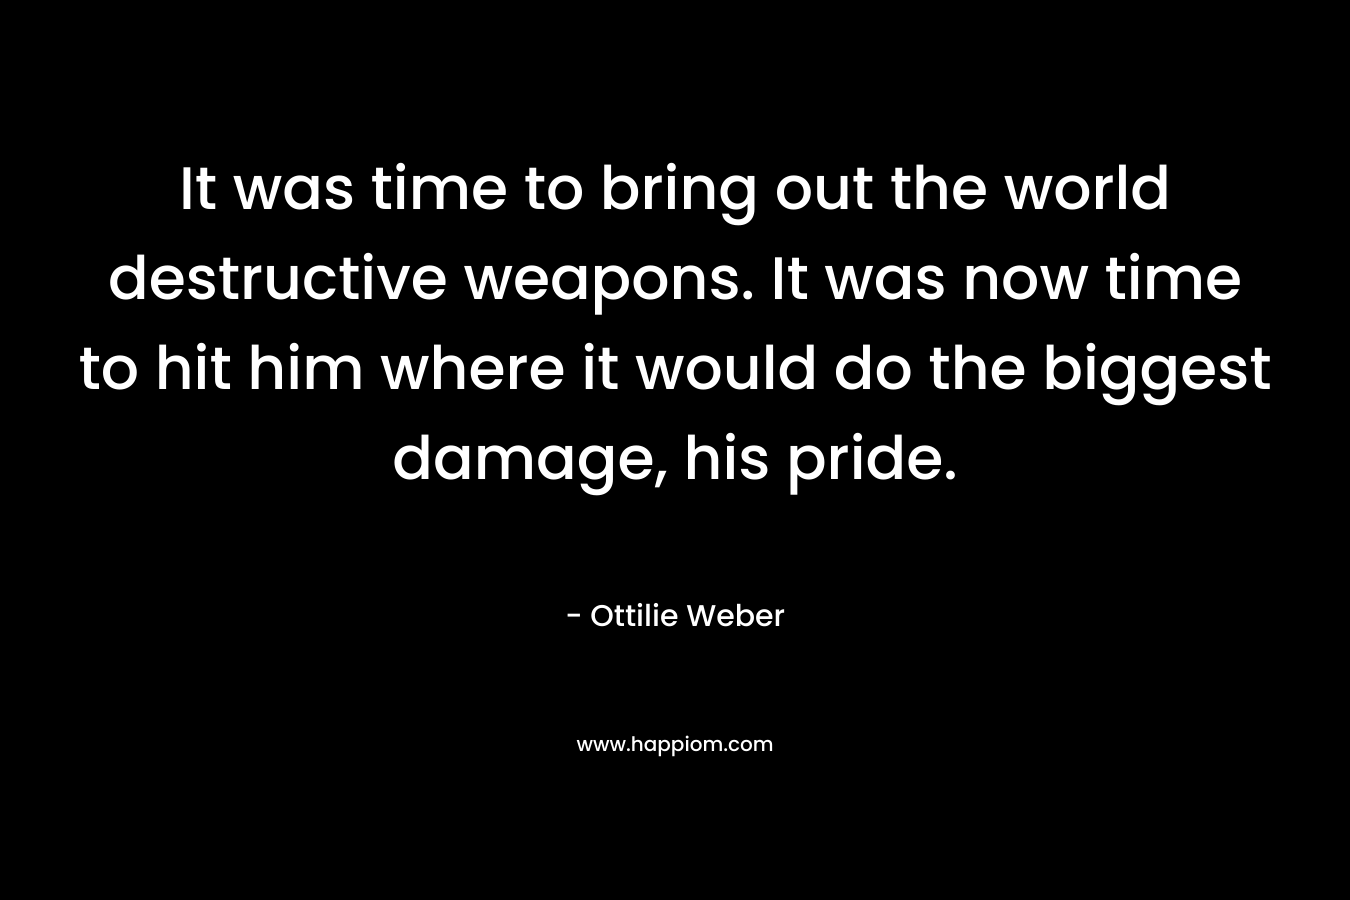 It was time to bring out the world destructive weapons. It was now time to hit him where it would do the biggest damage, his pride. – Ottilie Weber